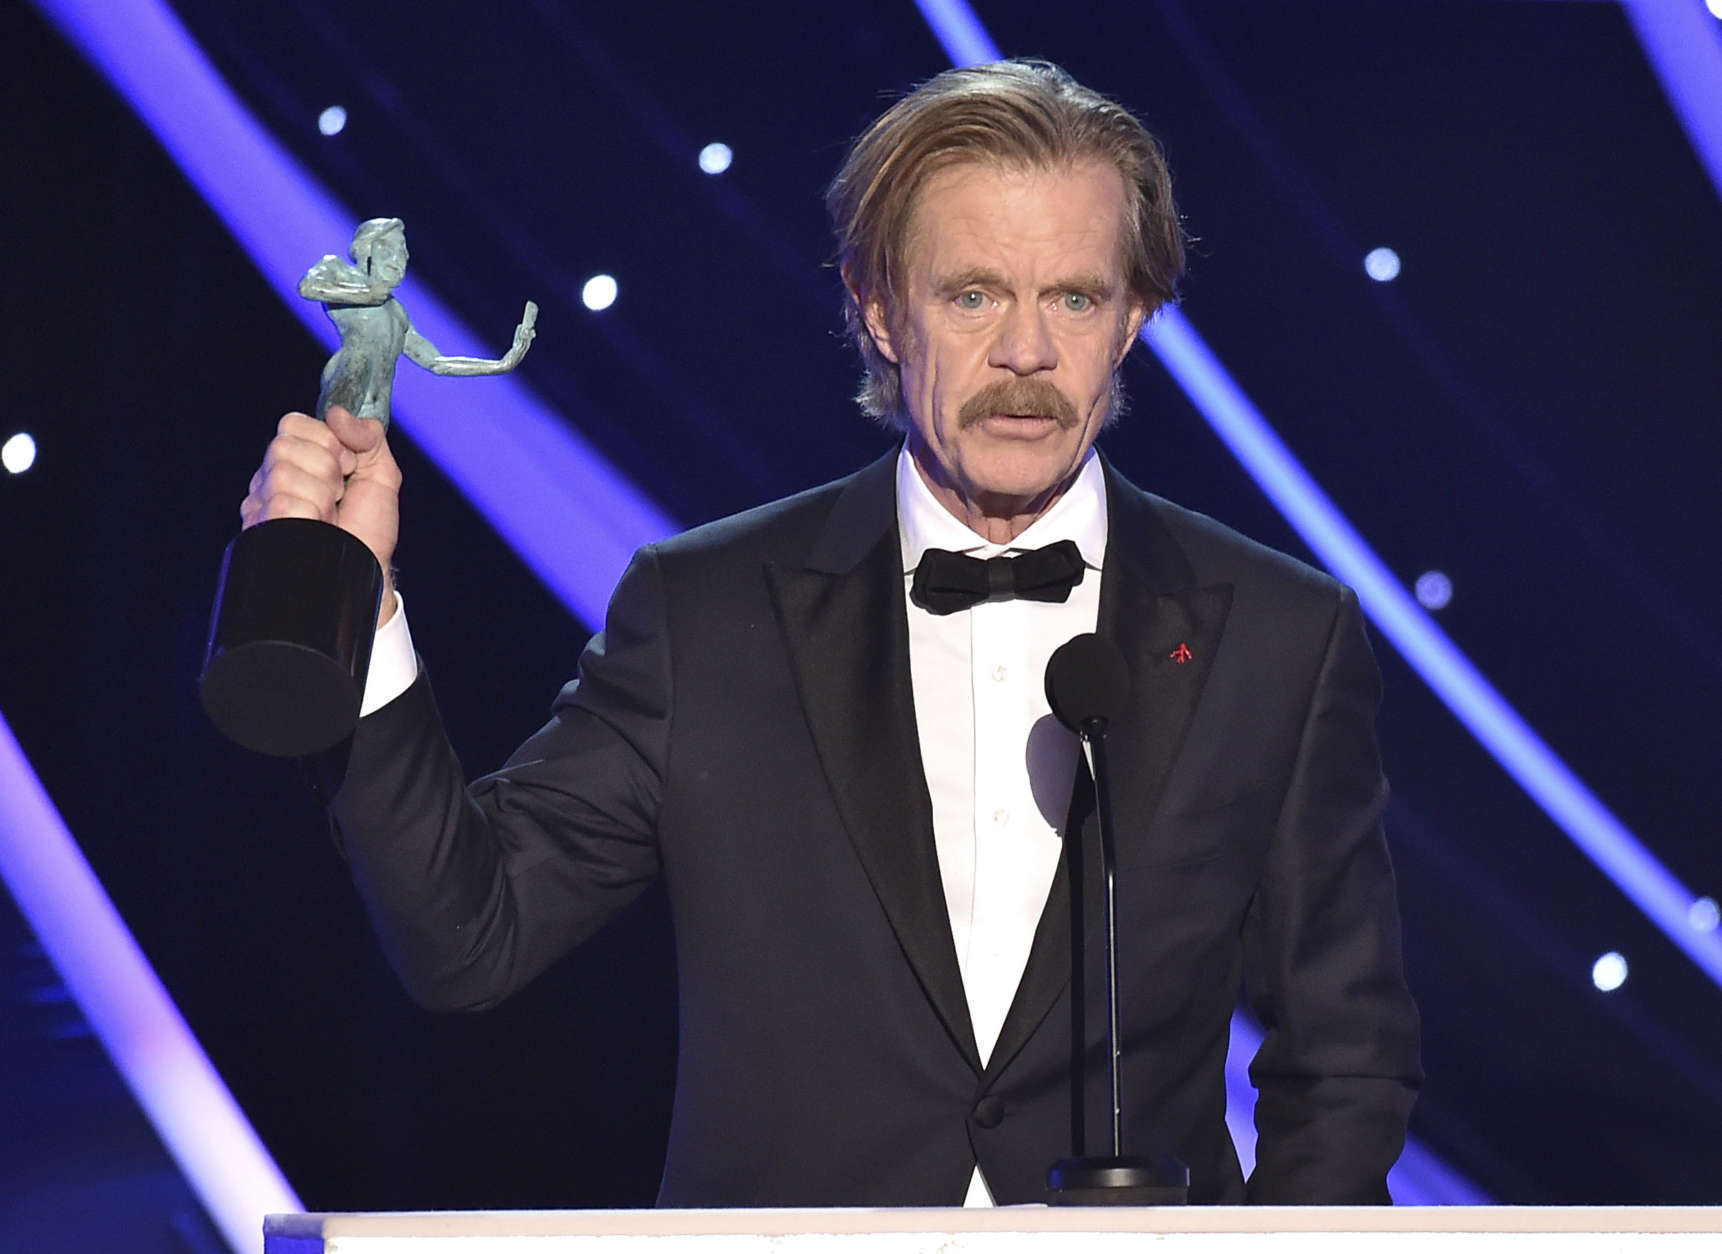 William H. Macy accepts the award for outstanding performance by a male actor in a comedy series for "Shameless" at the 24th annual Screen Actors Guild Awards at the Shrine Auditorium &amp; Expo Hall on Sunday, Jan. 21, 2018, in Los Angeles. (Photo by Vince Bucci/Invision/AP)